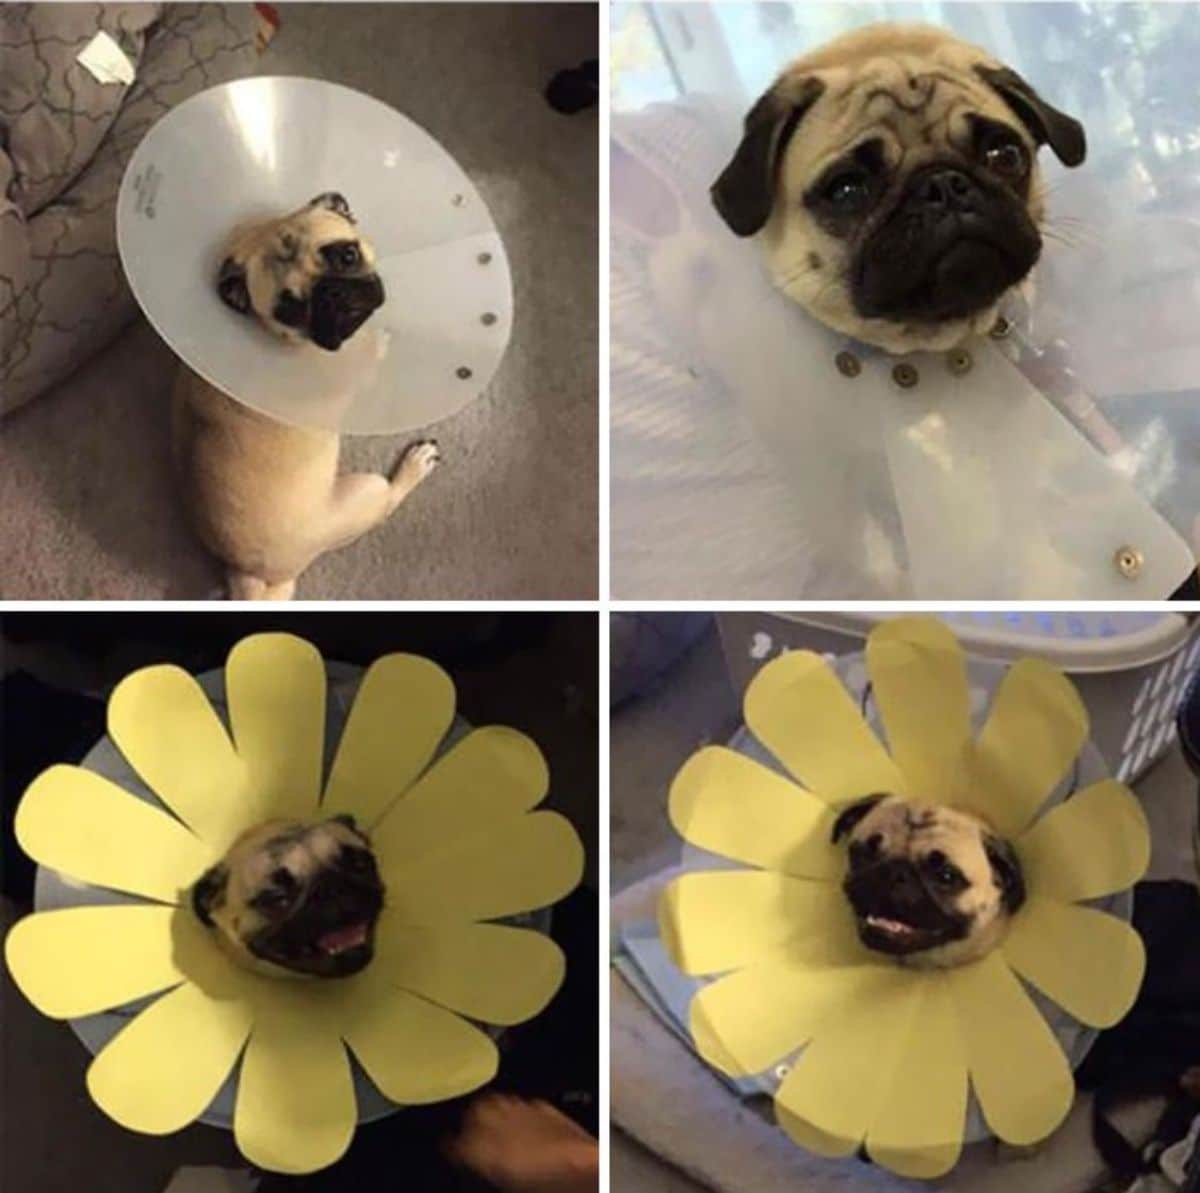 2 photos of a brown pug in cone of shame and 2 photos of the cone of shame transformed into a sunflower